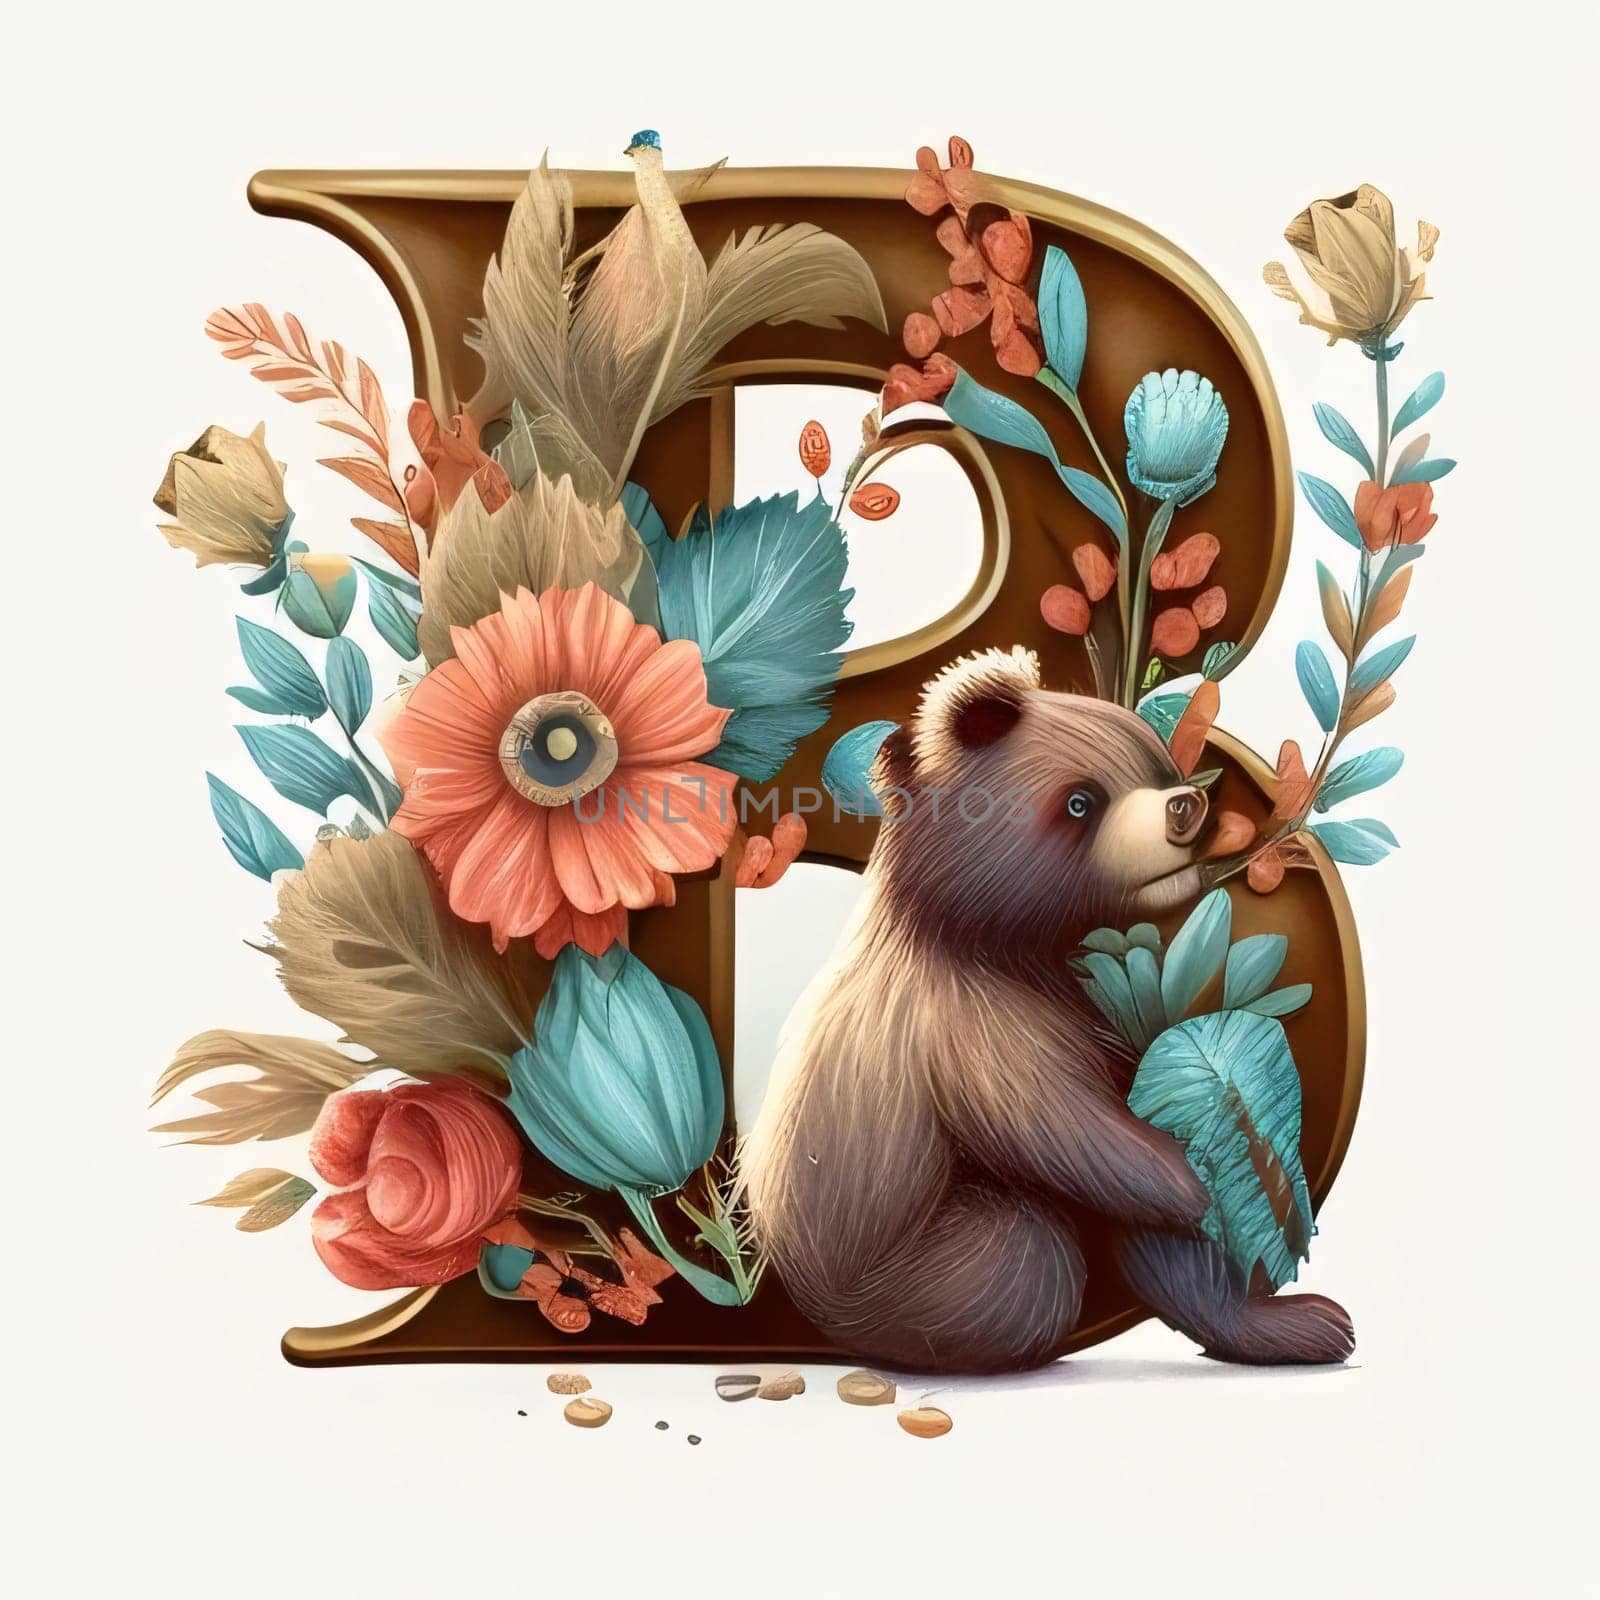 Graphic alphabet letters: Alphabet letter B with cute cartoon bear among flowers and leaves.